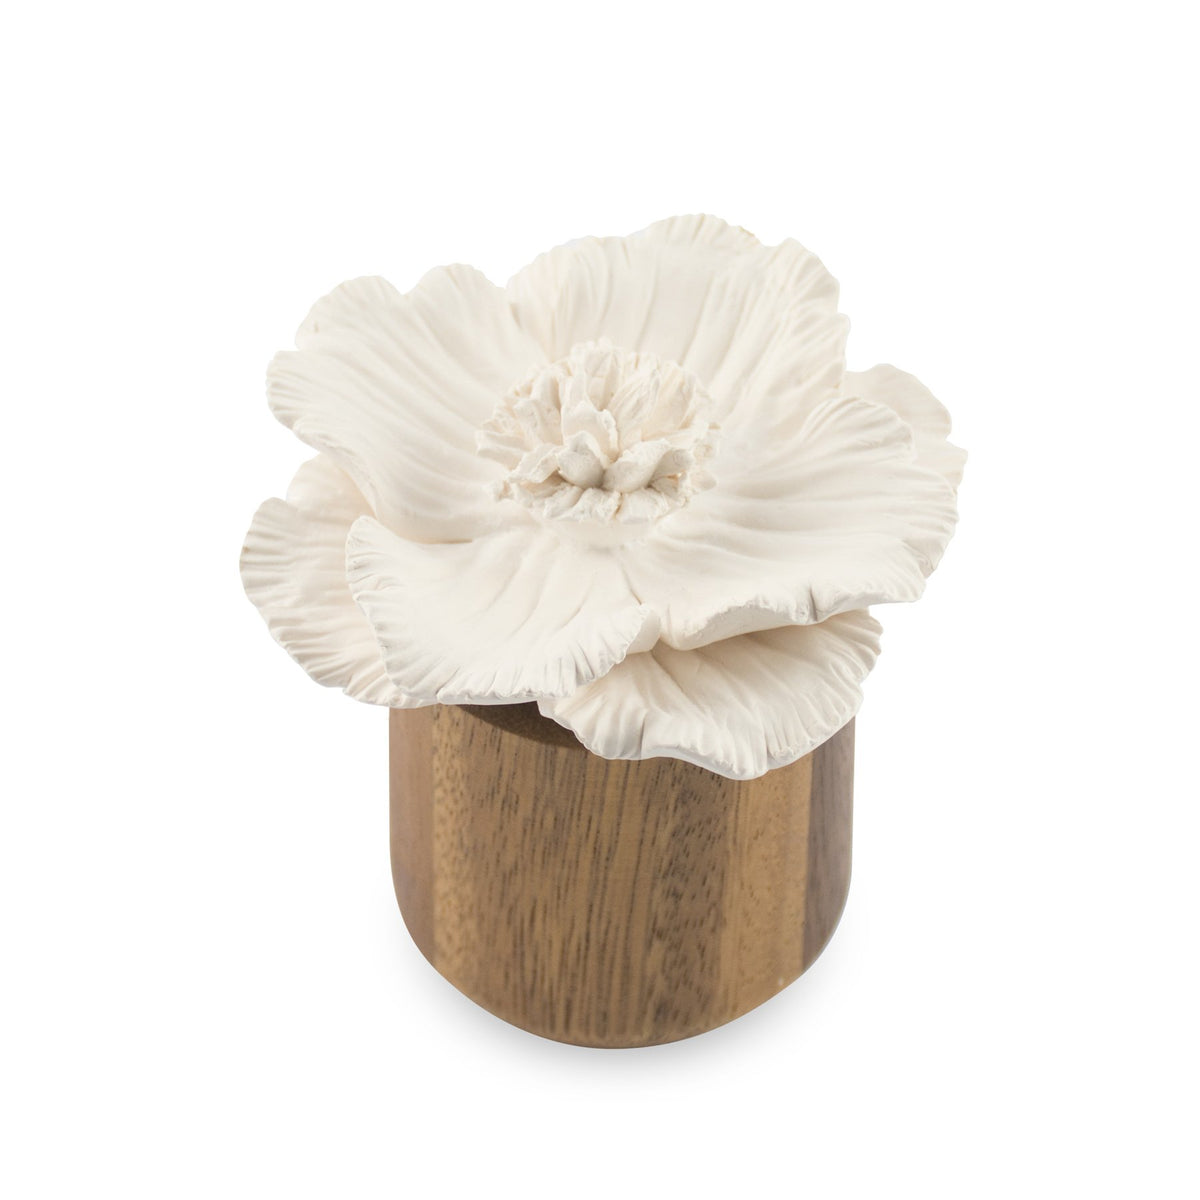 Anemone Flower Scenting Clay Diffuser (Tall Bouquet)